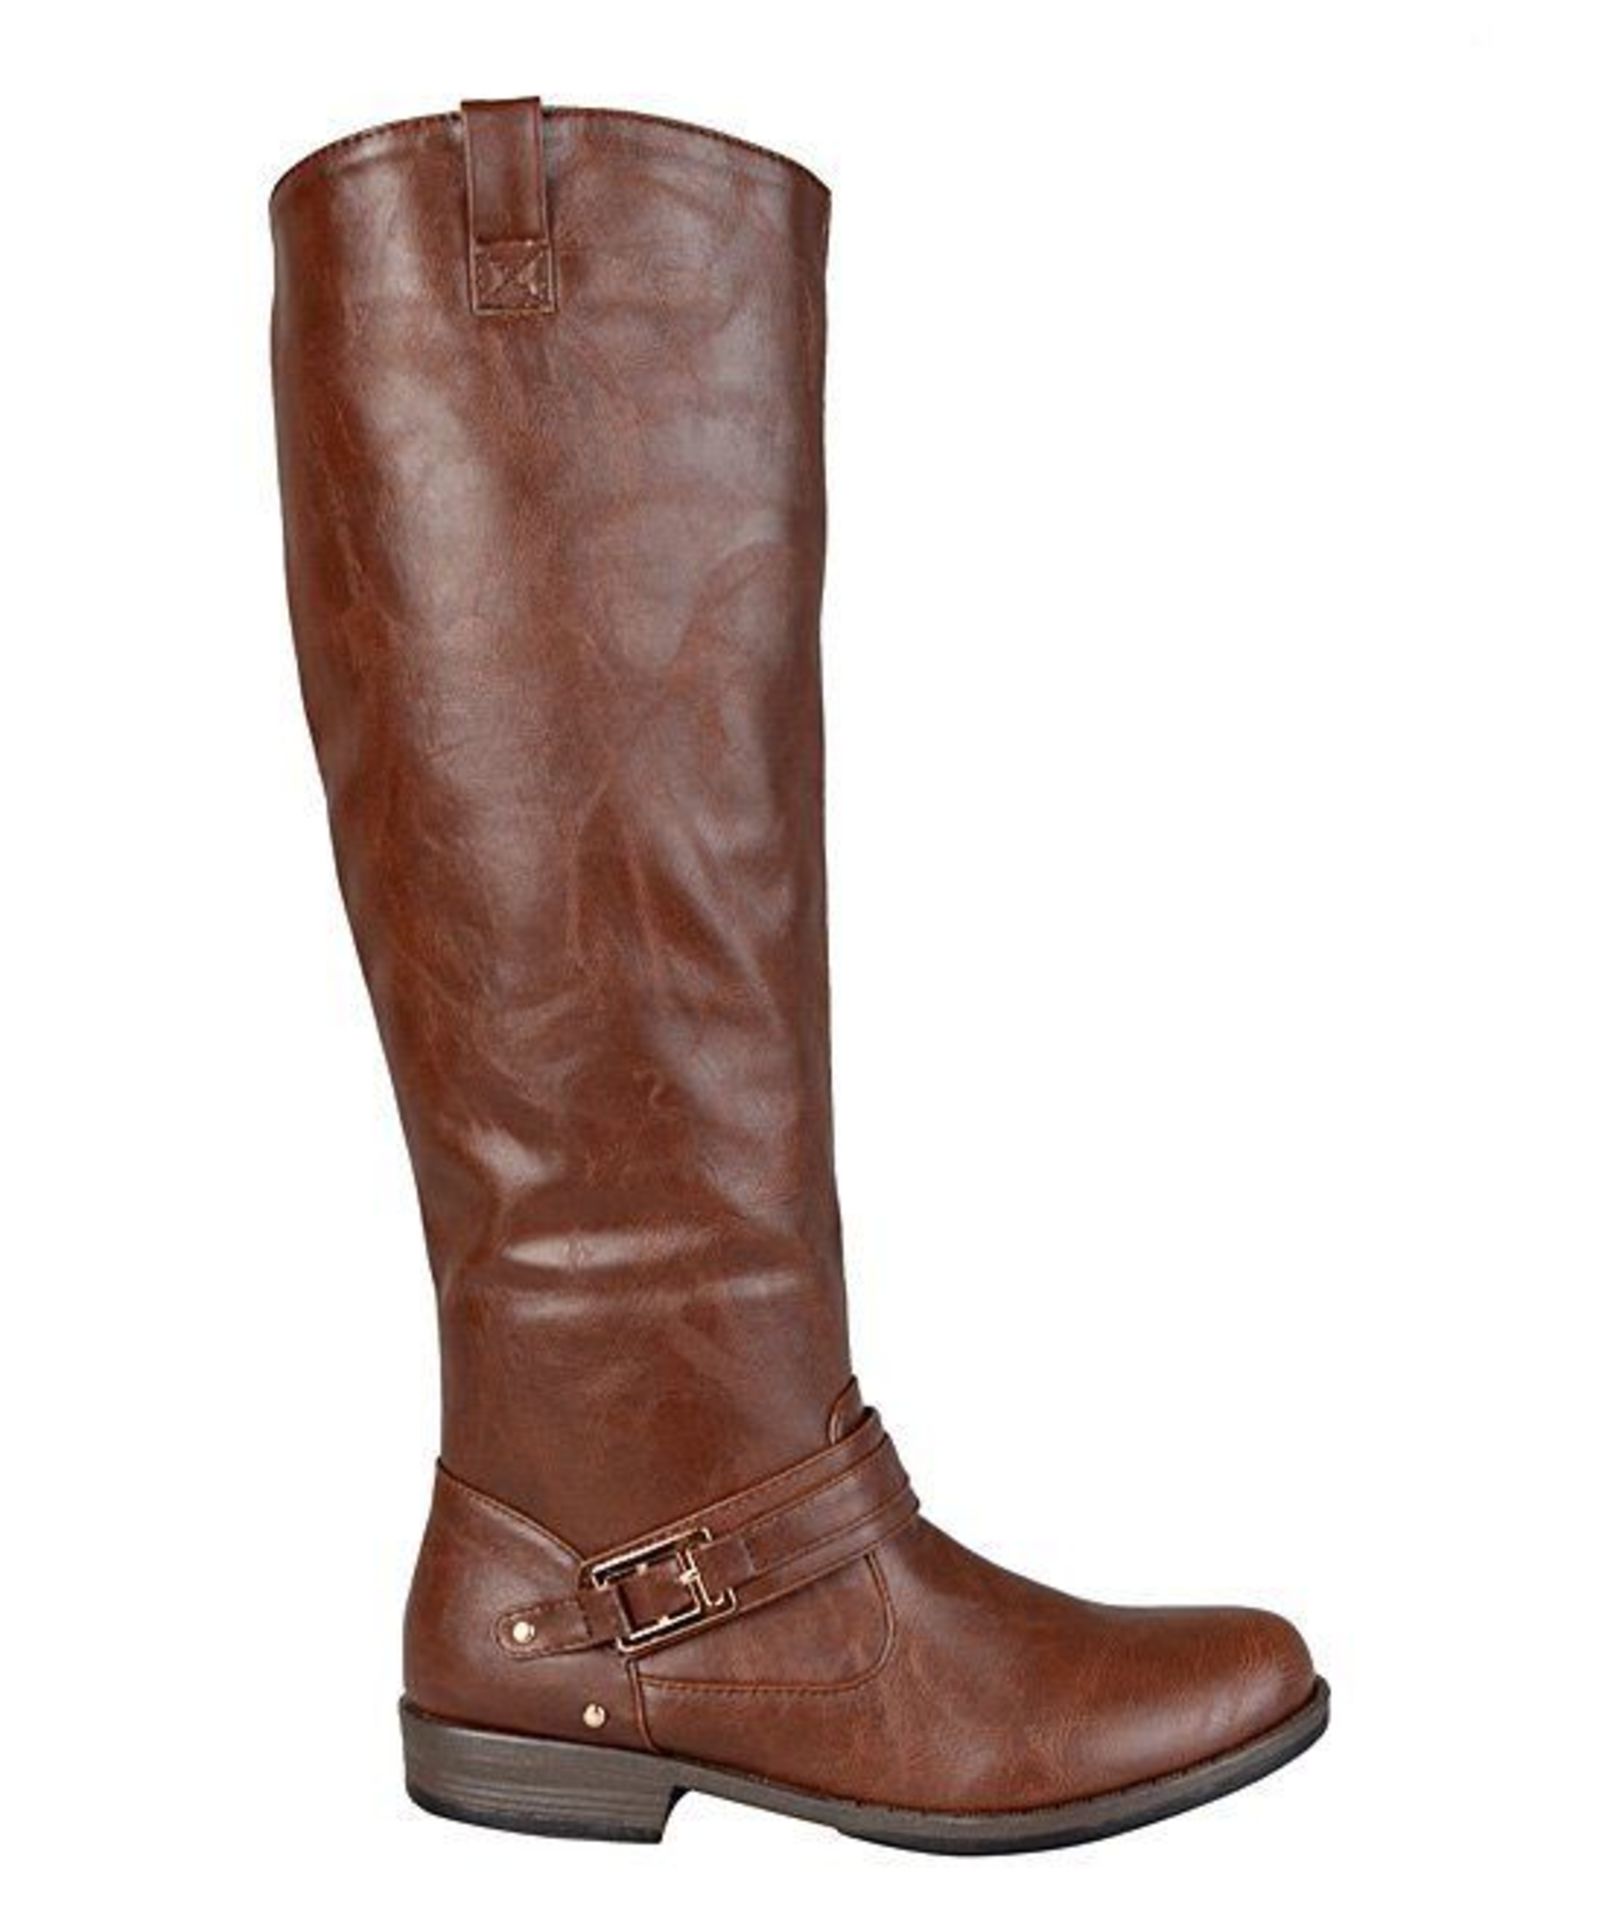 Journee Collection Brown Kai Boot (Uk Size 4.5:Us Size 7) (New with box) [Ref: 14251359-C-002] - Image 2 of 5